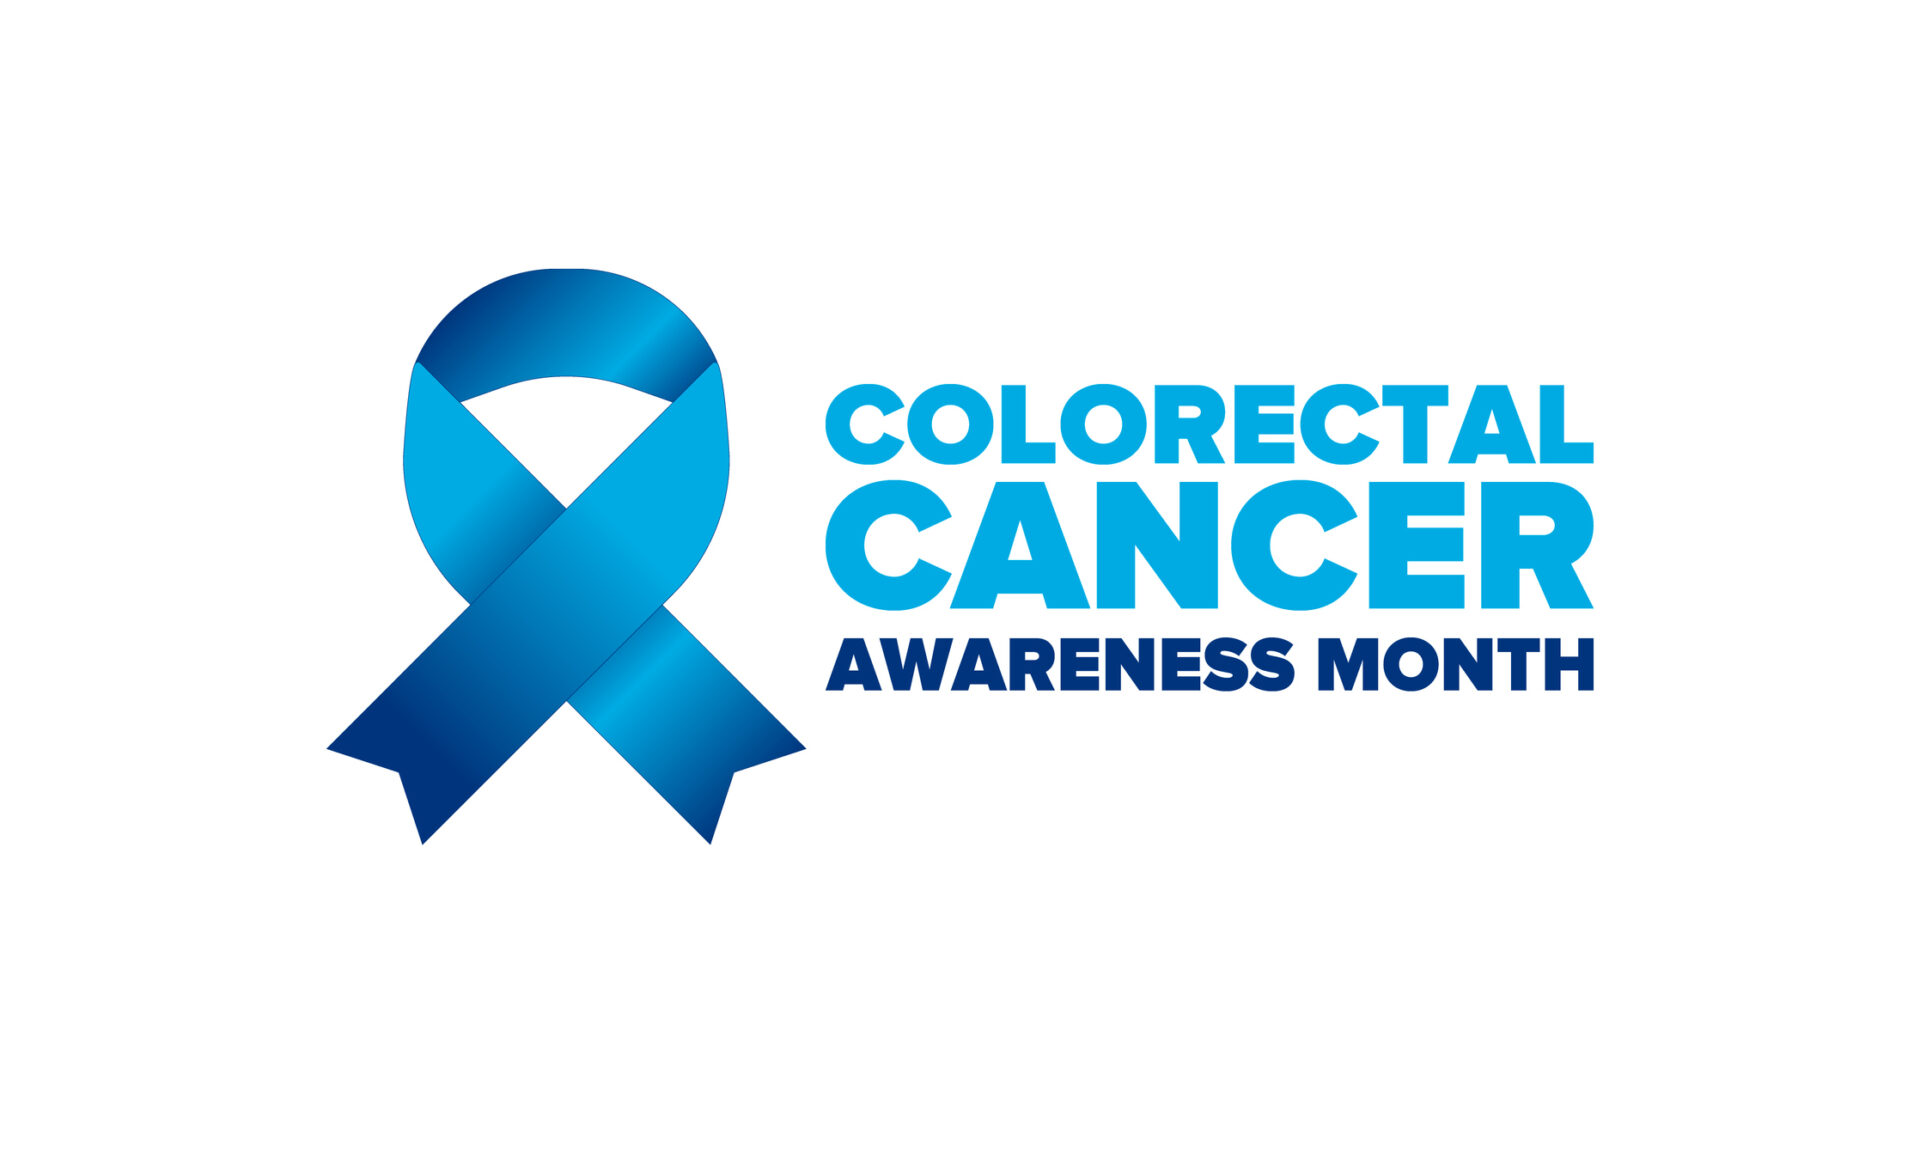 Colorectal Cancer Awareness Month. Celebrate annual in March. Control and protection. Prevention campaign. Medical health care concept. Poster with blue ribbon. Banner, background. Vector illustration